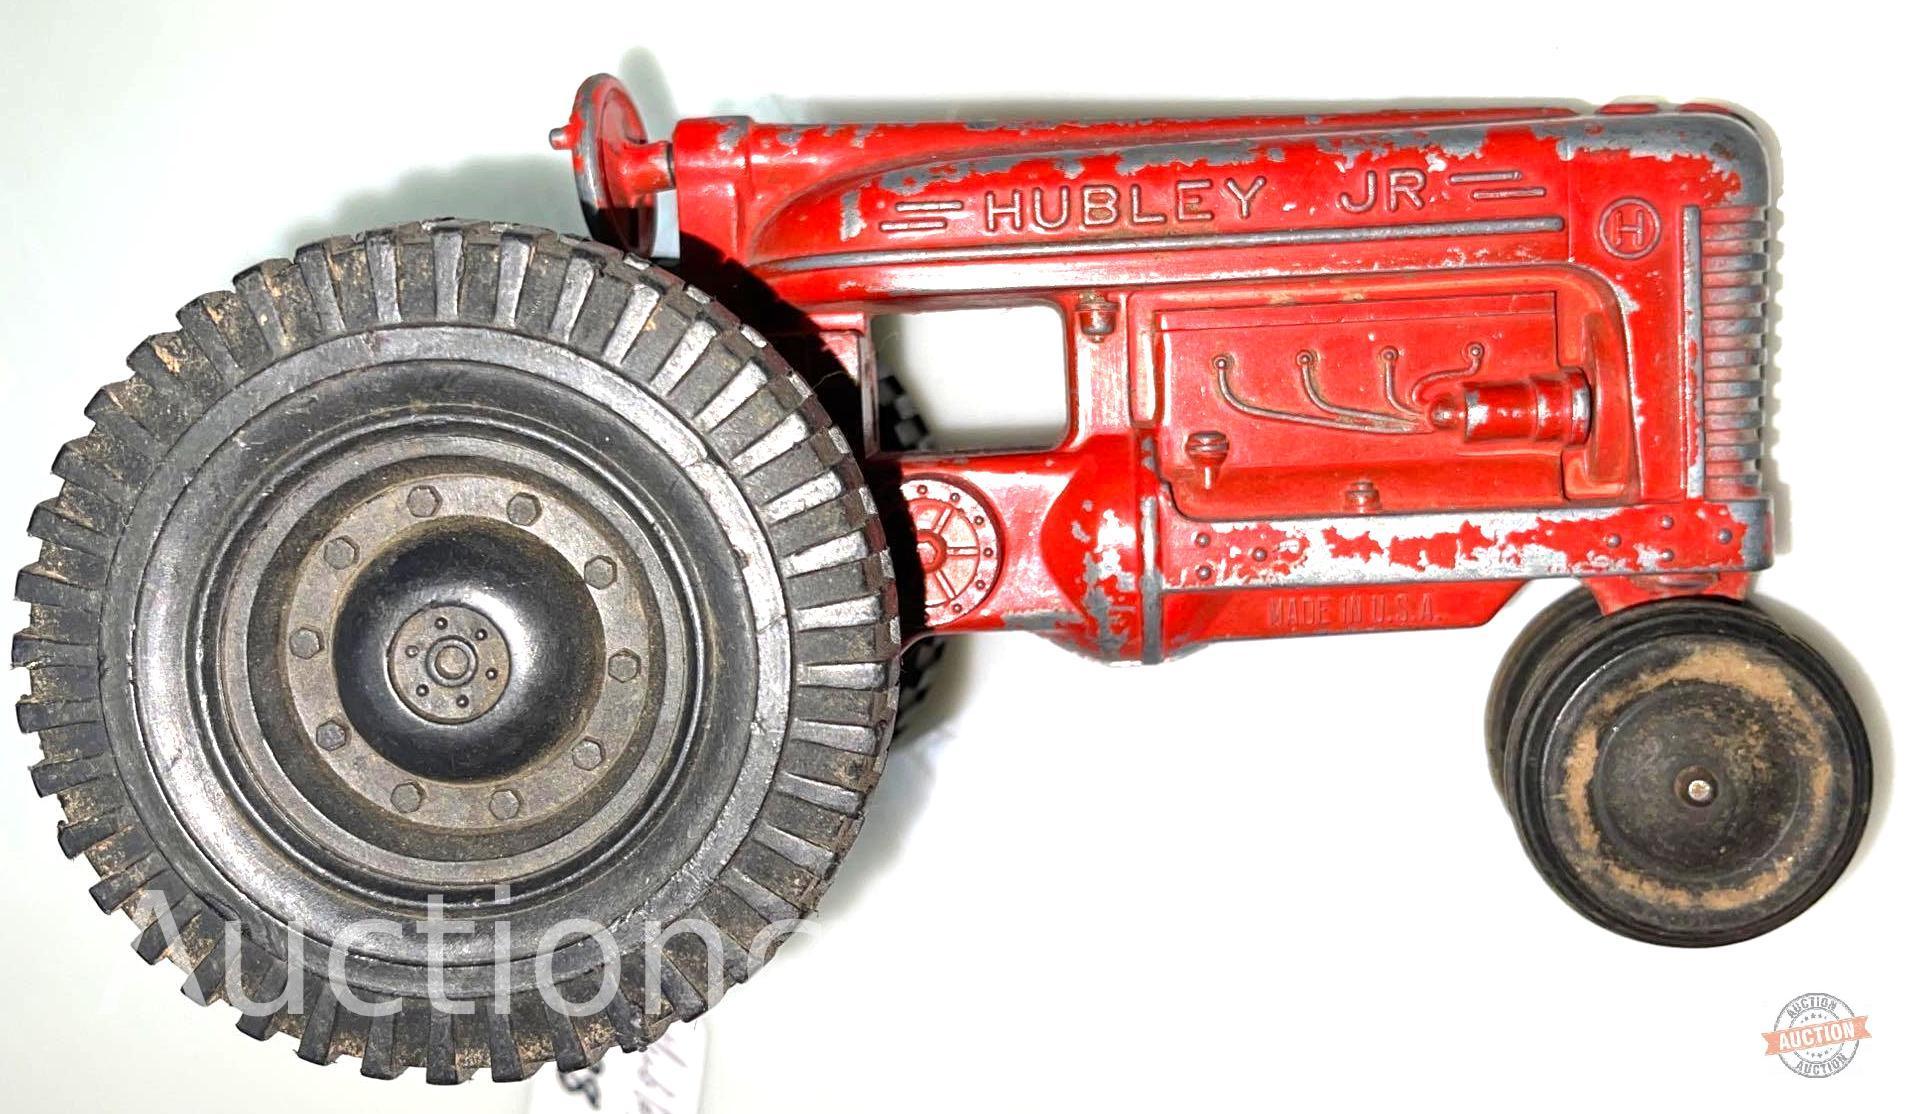 Toys - 2 Collectible tractors, Hubley Jr.